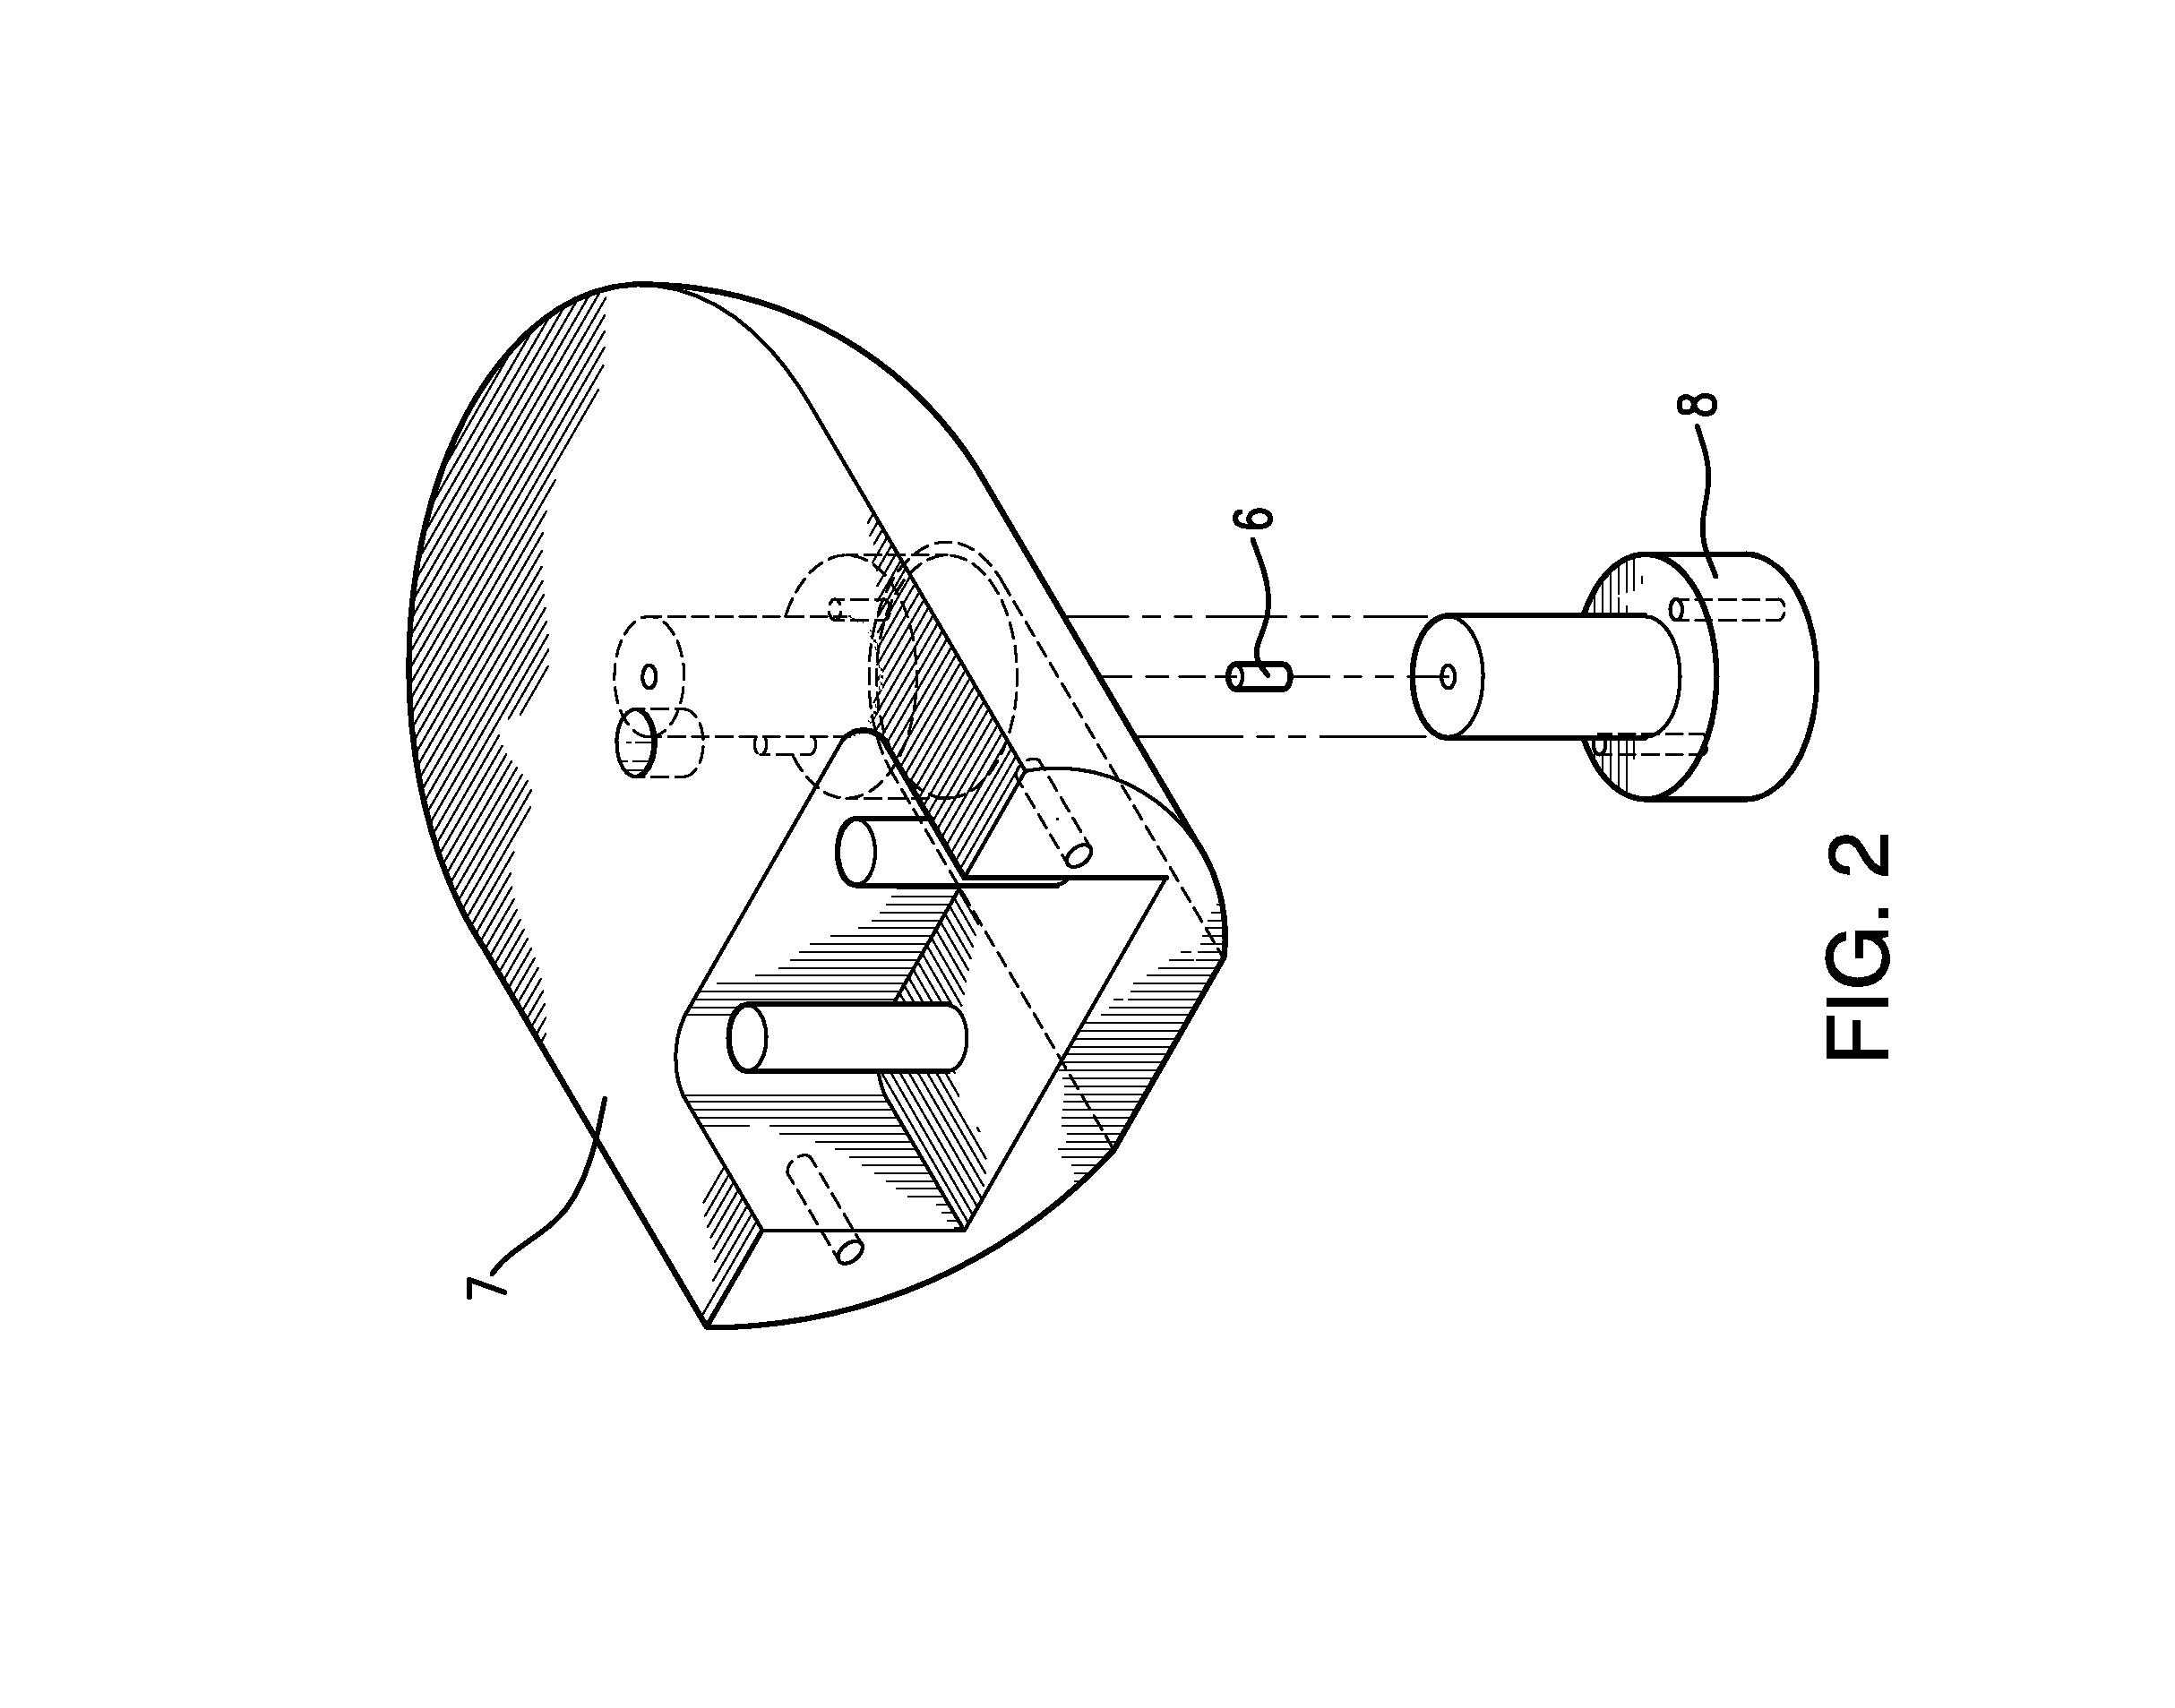 Direct visualization robotic intra-operative radiation therapy device with radiation ablation capsule